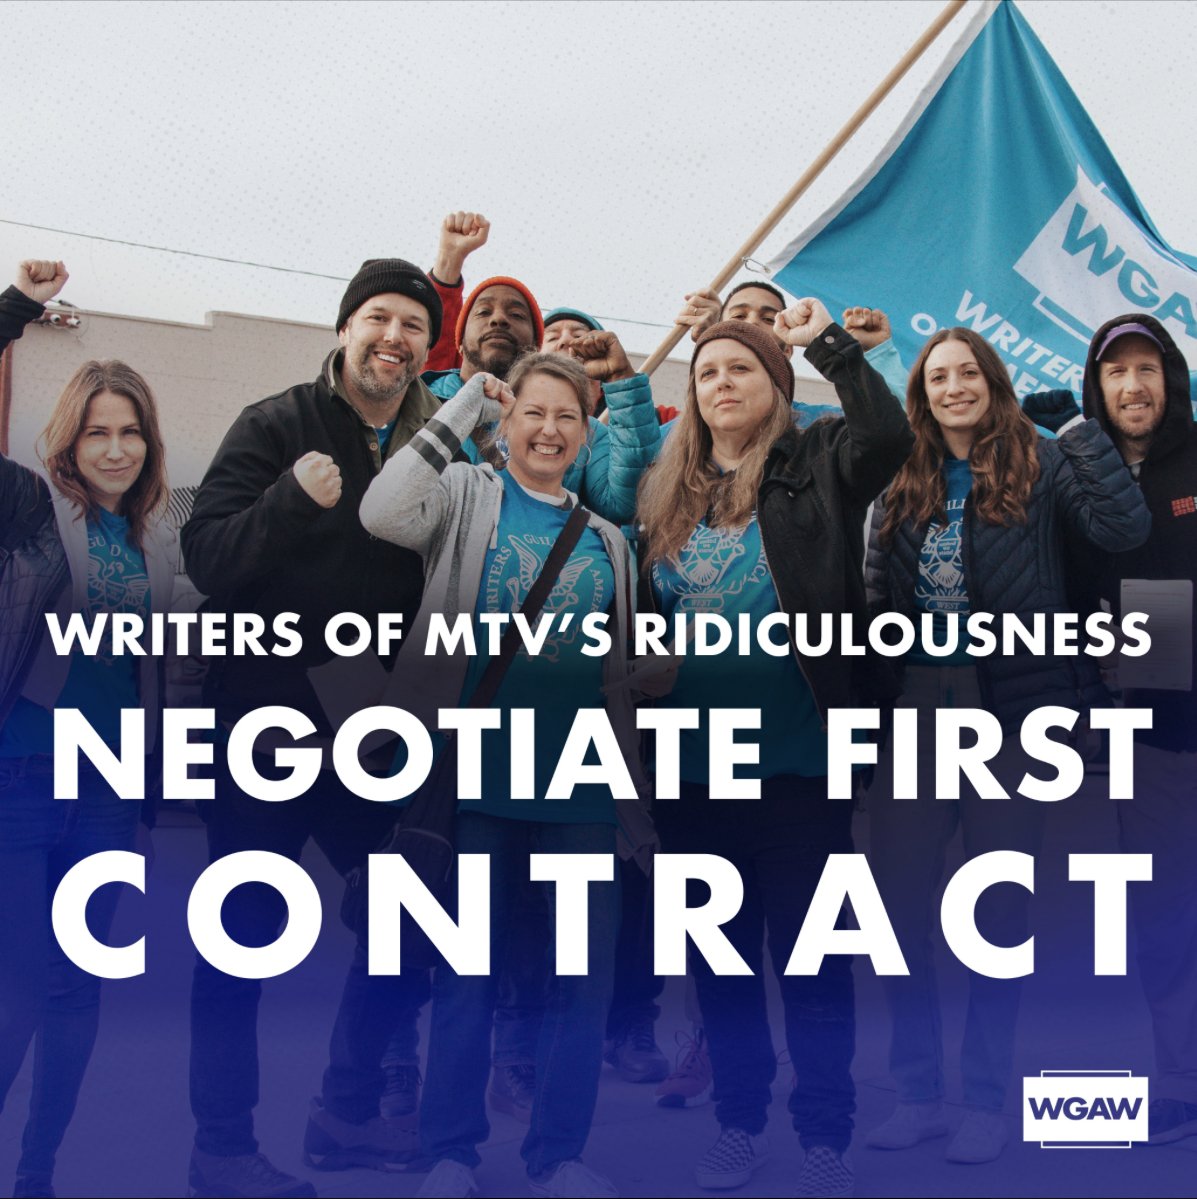 HUGE NEWS: The Writers Guild just won our biggest victory since the strike. We flipped a non-union “unscripted” show. Starting today, all of the writers on Ridiculousness will have WGA coverage, health care, and residuals. Let me explain how we did it, and why it's a big deal.🧵